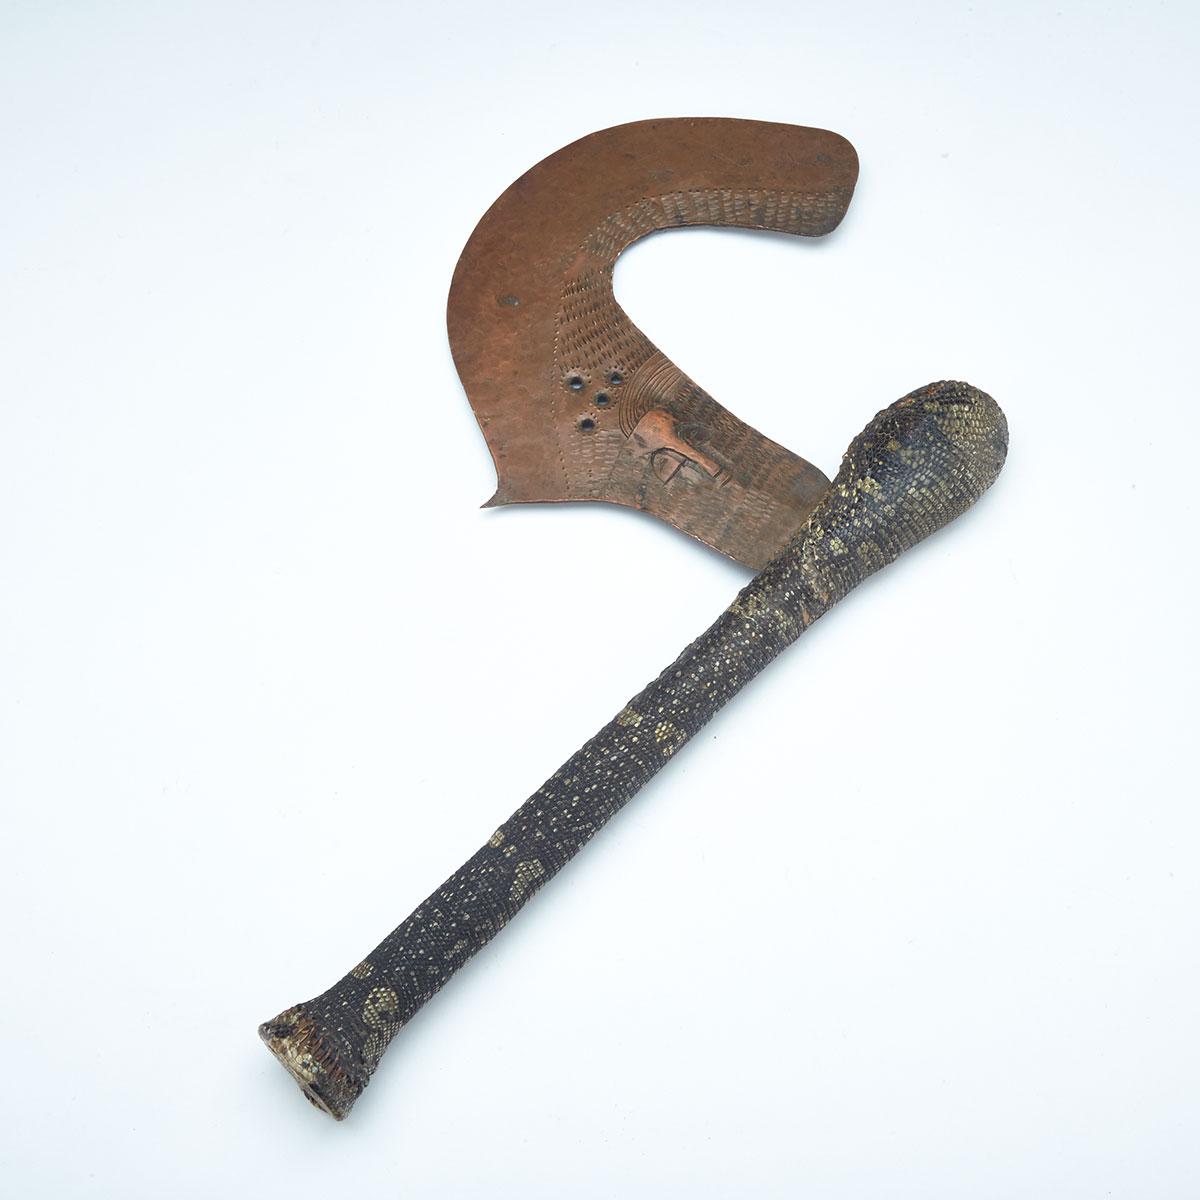 African Songye/Nsapo Ceremonial or Prestige Axe, 19th/20th century